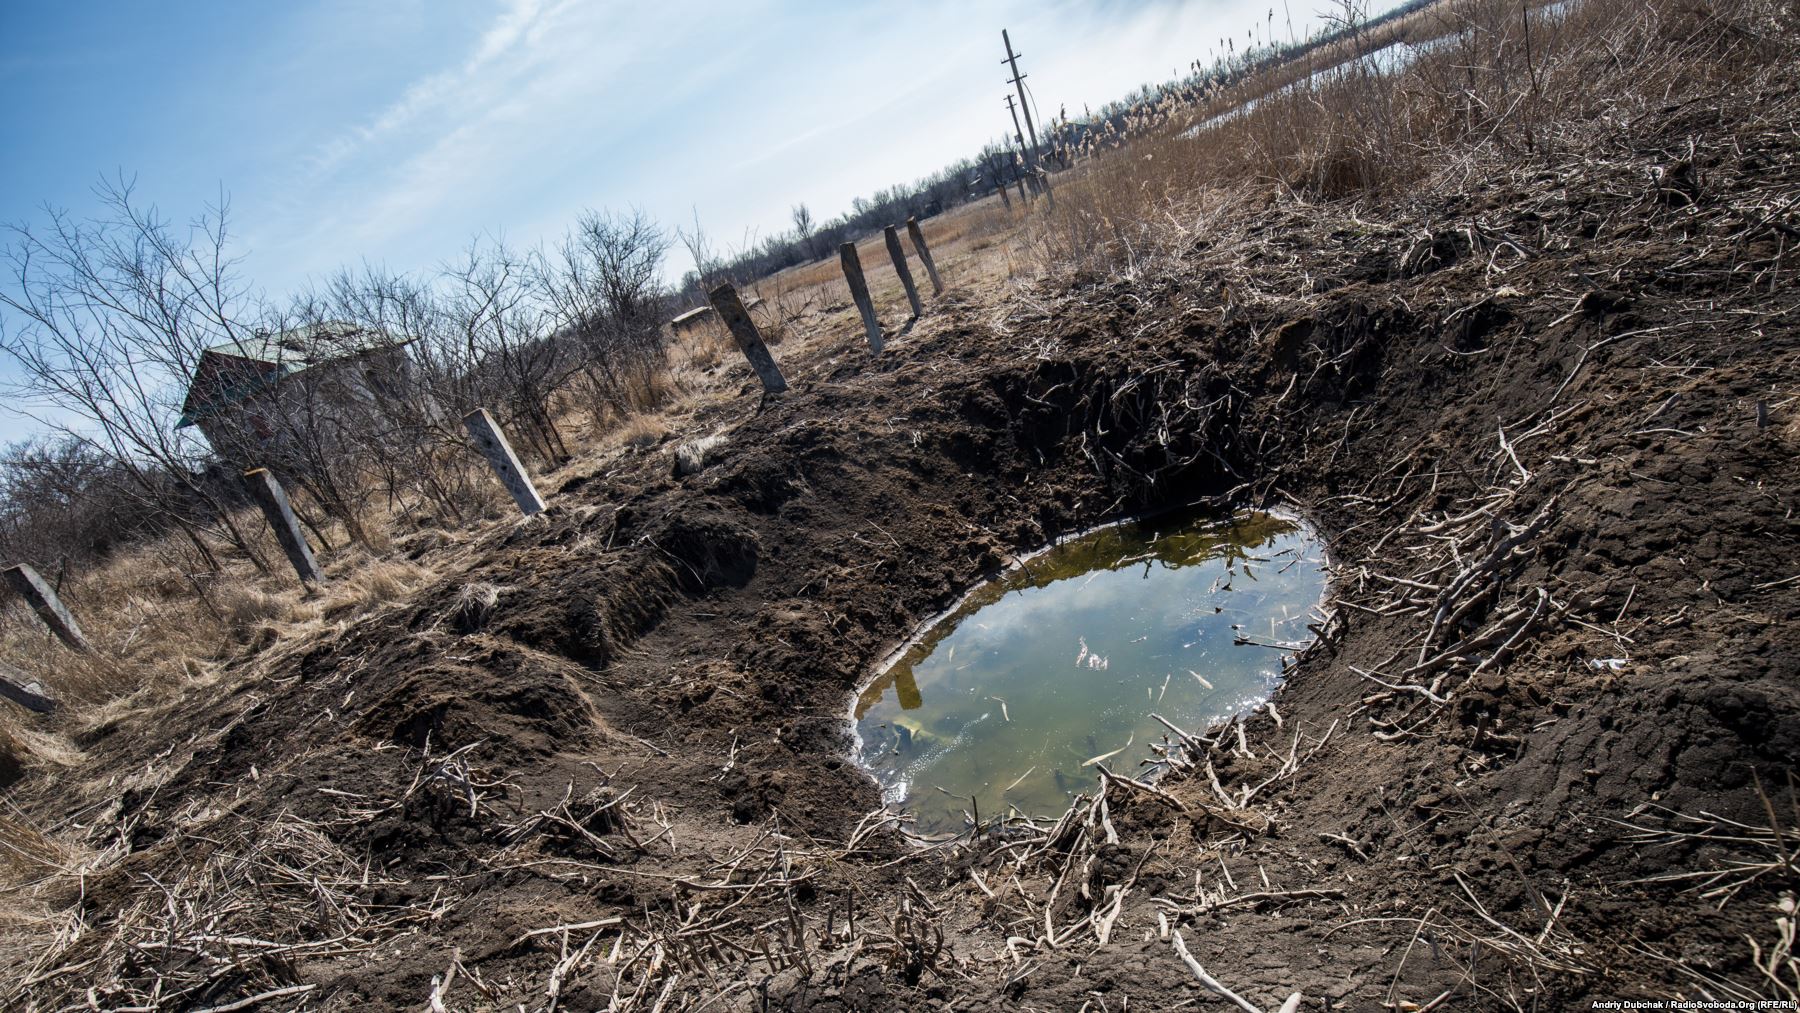 A crater left by the shell of a 152-mm field gun. Photo by: Andriy Dubchak